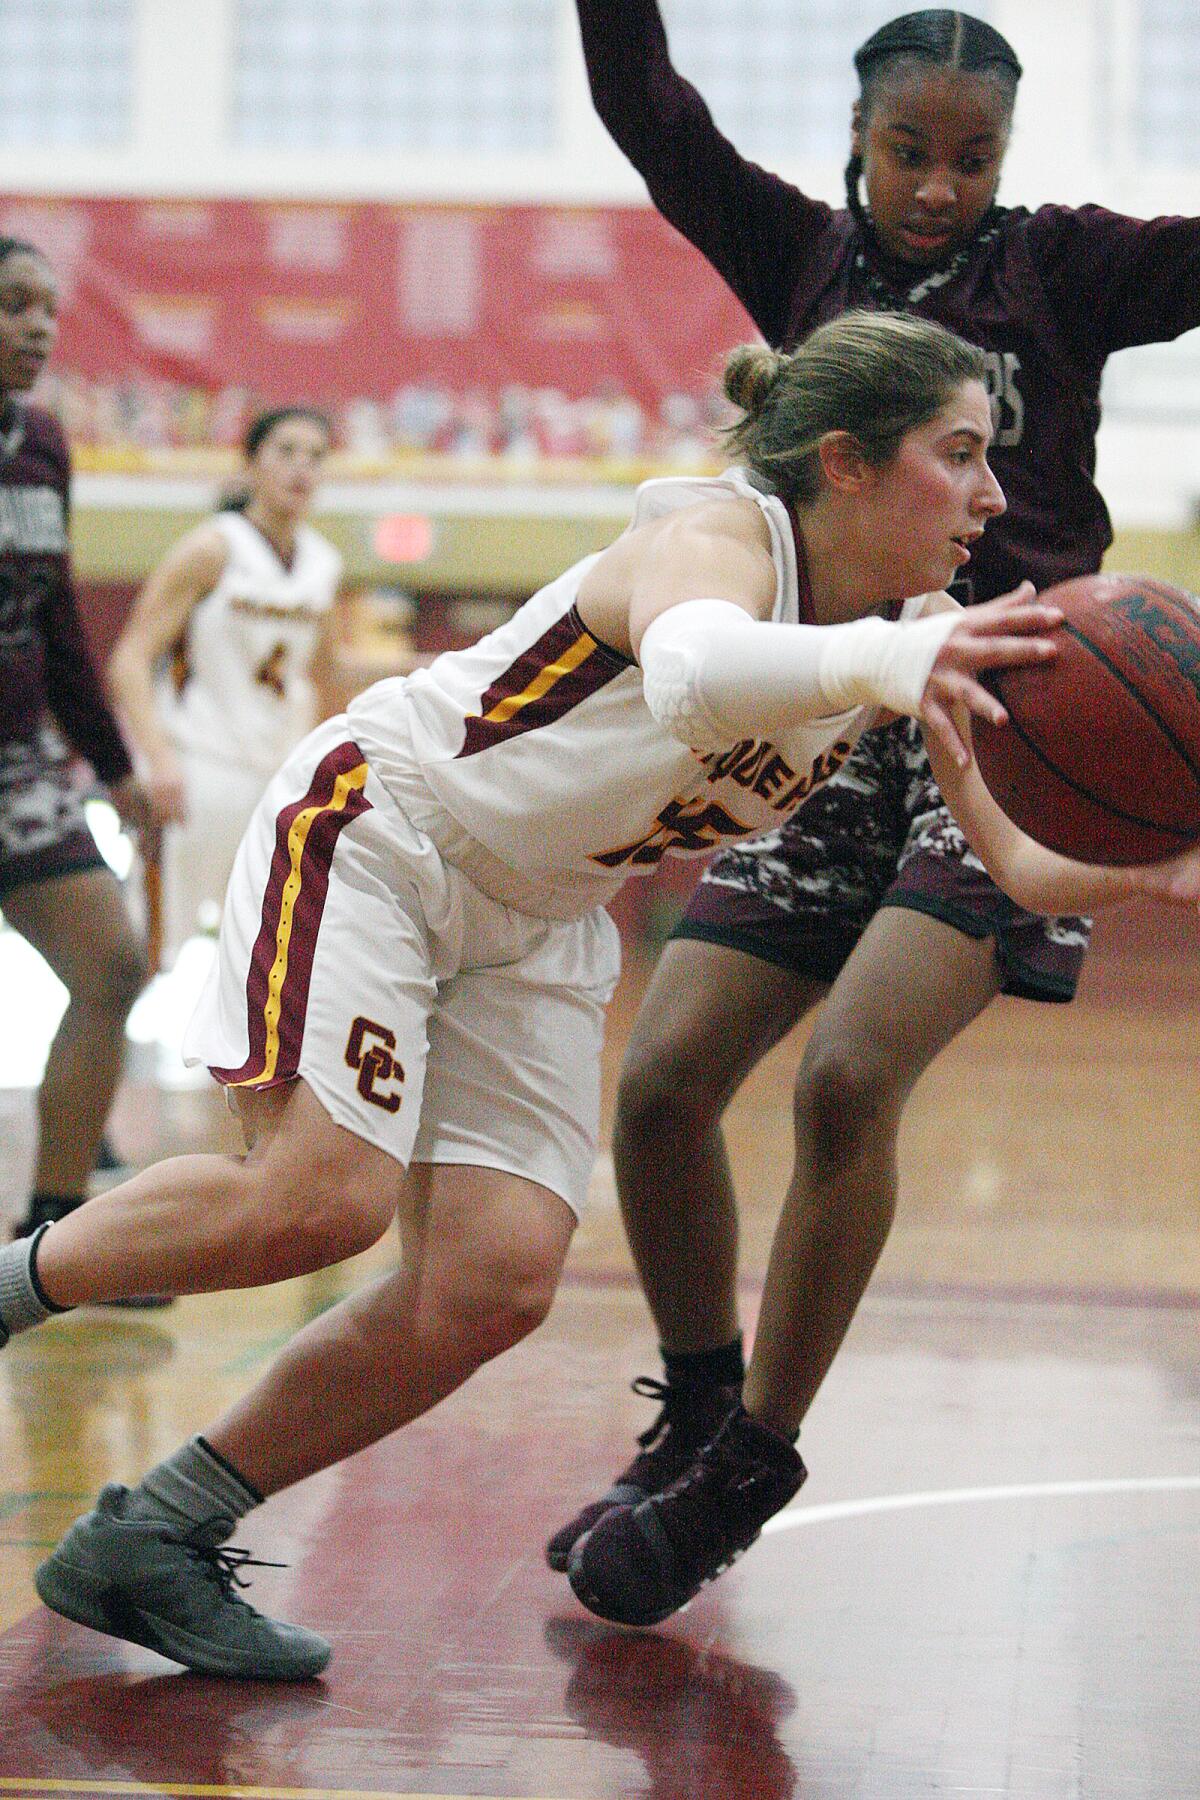 Glendale Community College's Gloria Bianchi drives under the basket defended by Antelope Valley's Malaiya Patton in a Western State Conference women's basketball game at Glendale Community College on Wednesday, January 22, 2020.